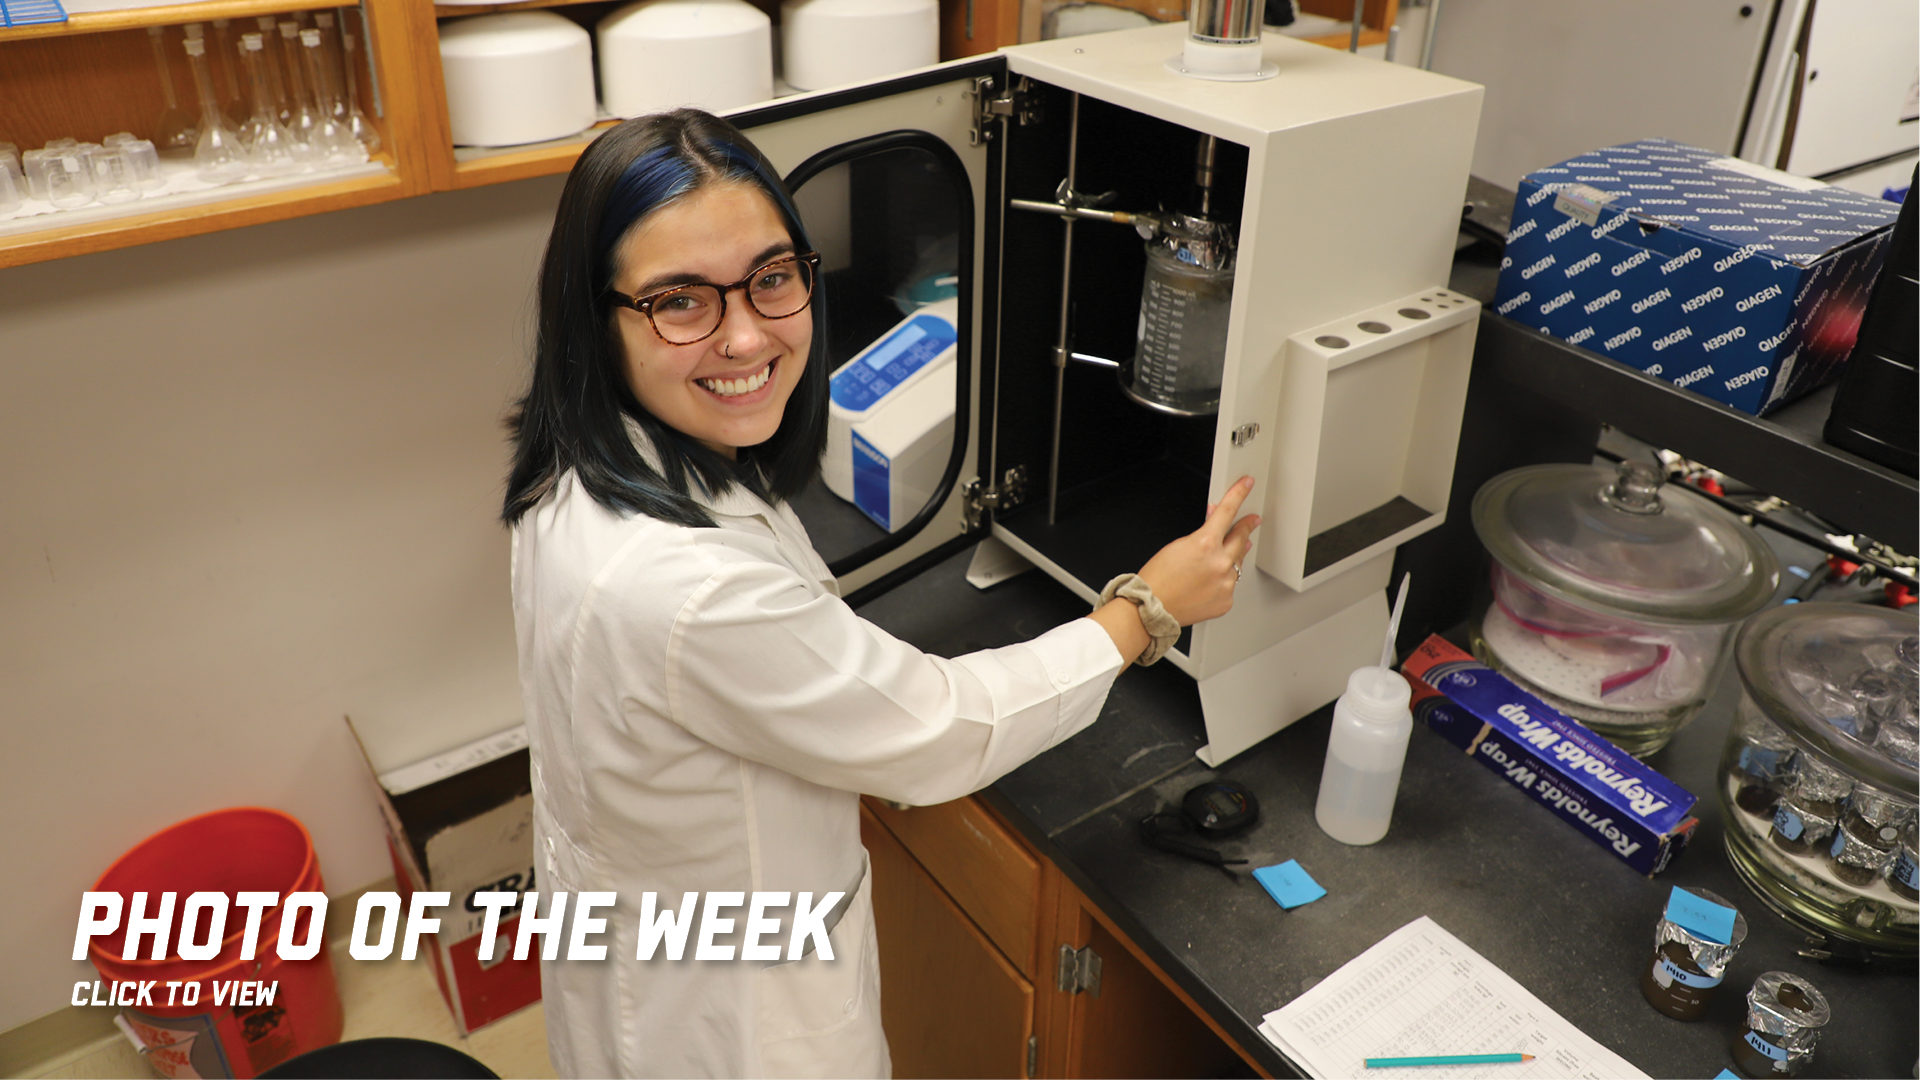 Sophia Merritt, a sophomore horticulture major, is at work in Assistant Professor Andrea Basche’s lab learning the basics of an optimized ultrasonication method.